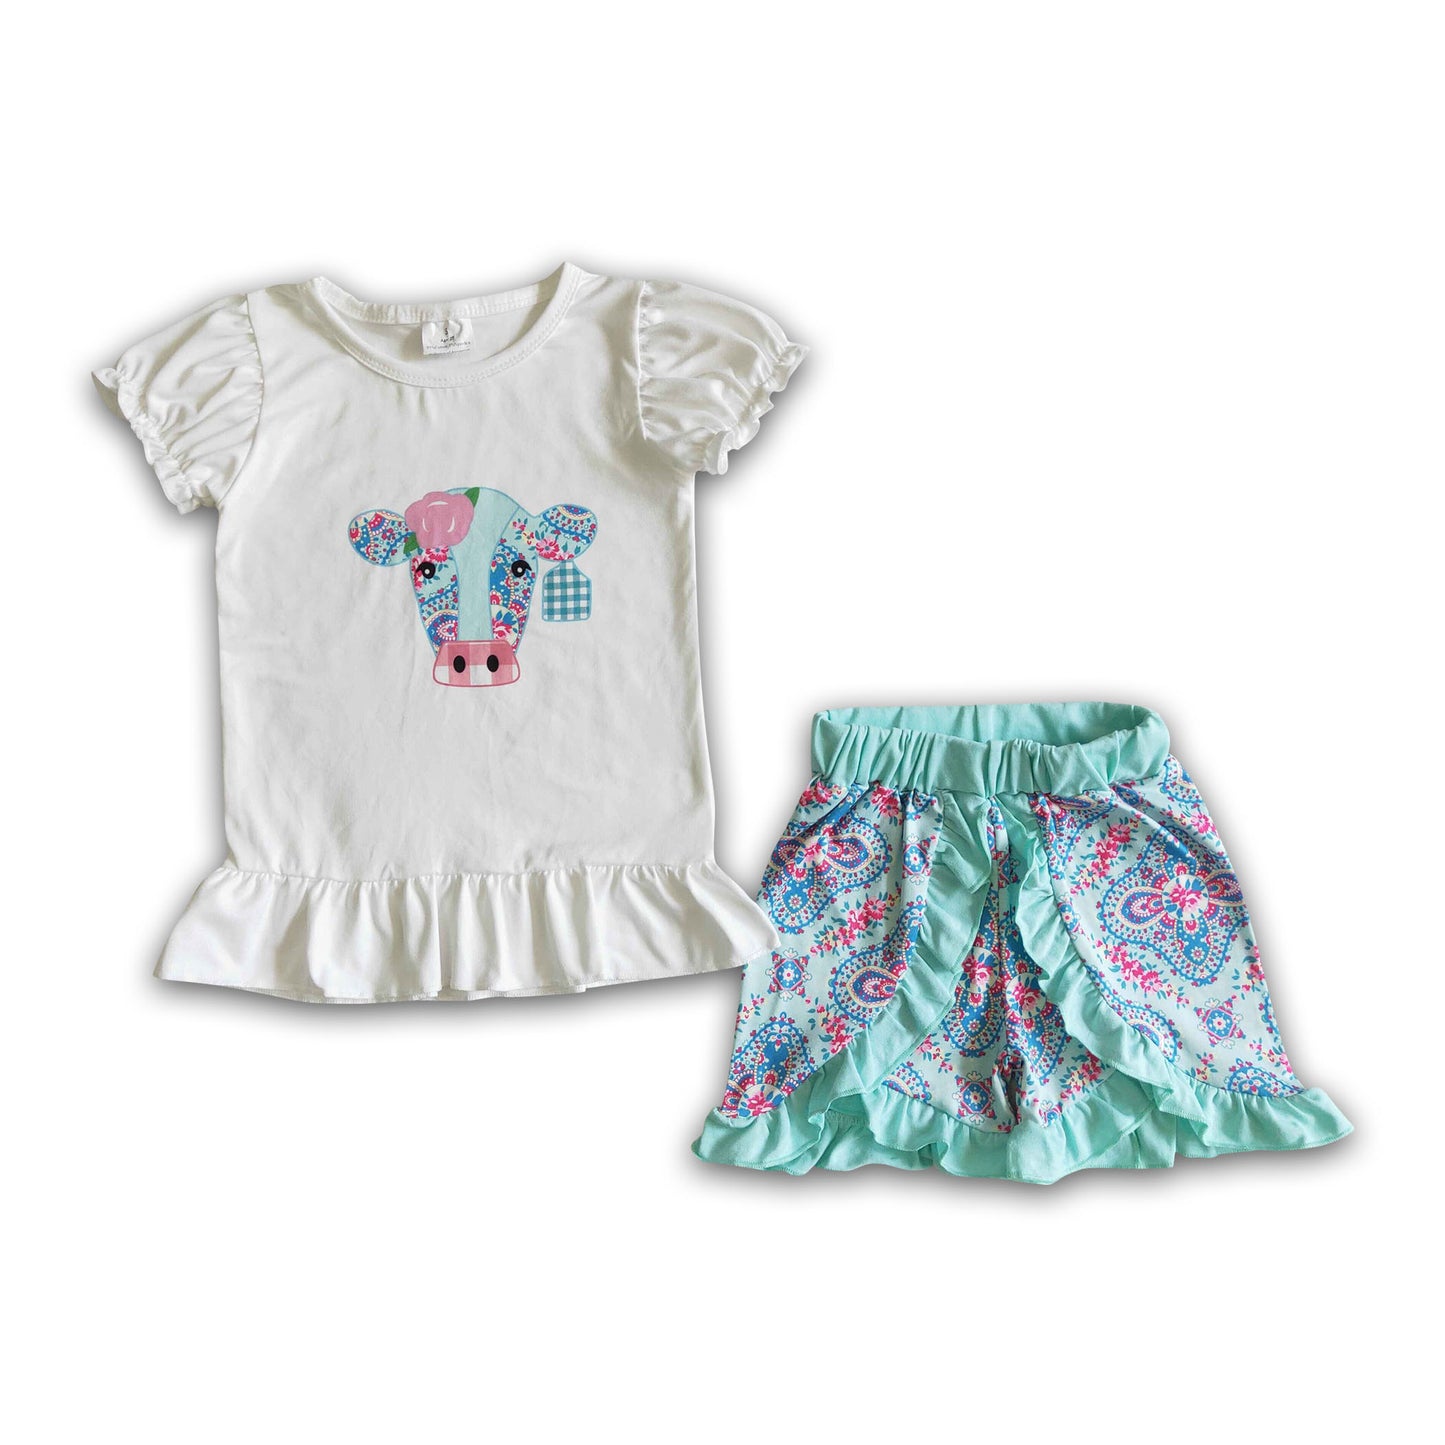 Cow print shorts outfits girls clothing